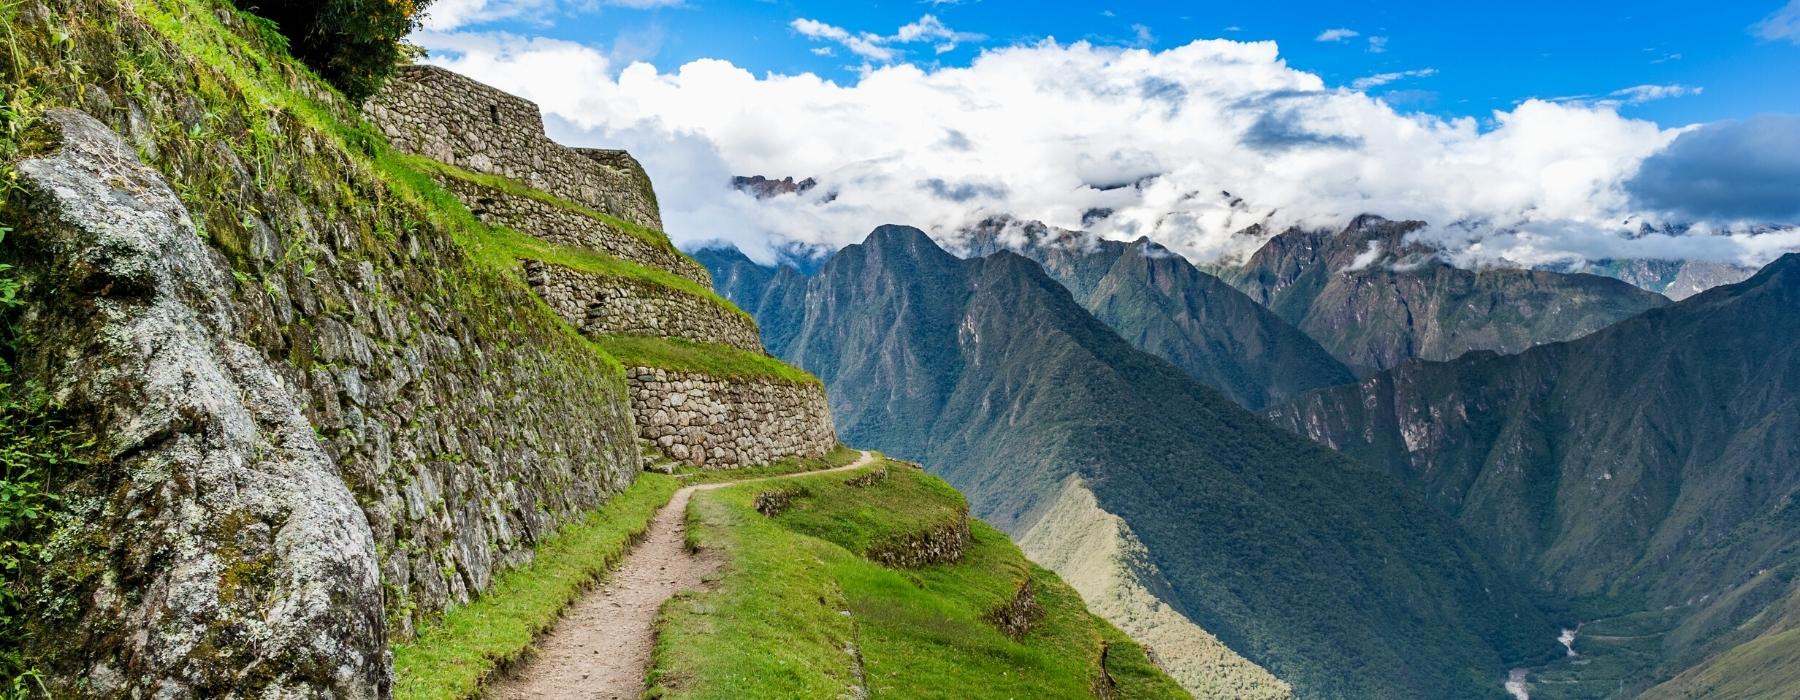 clasic inca trail by inca trail expeditions